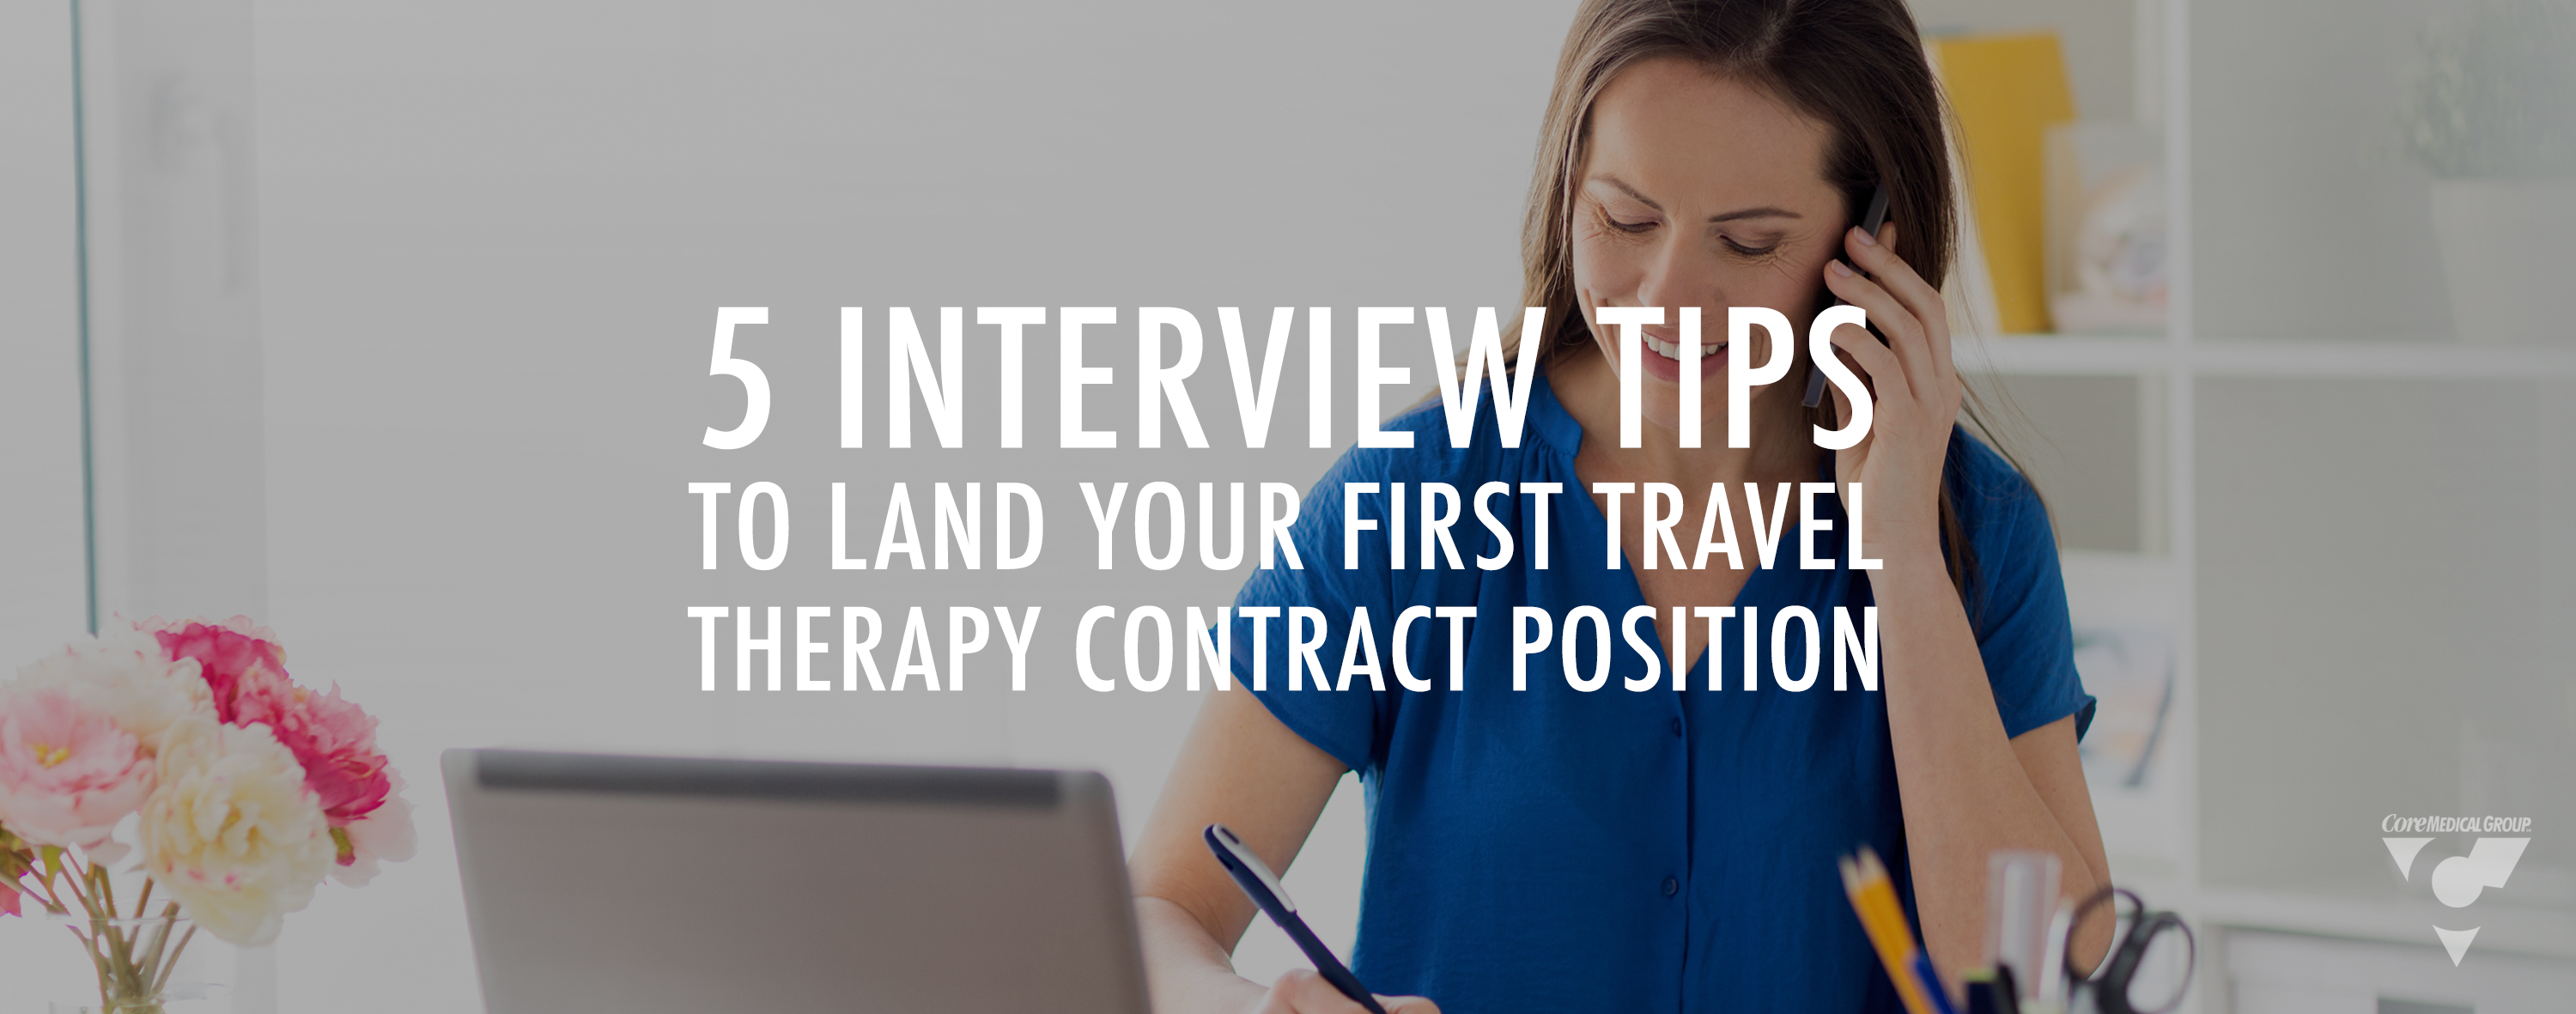 5 Interview Tips to Land Your First Travel Therapy Contract Position